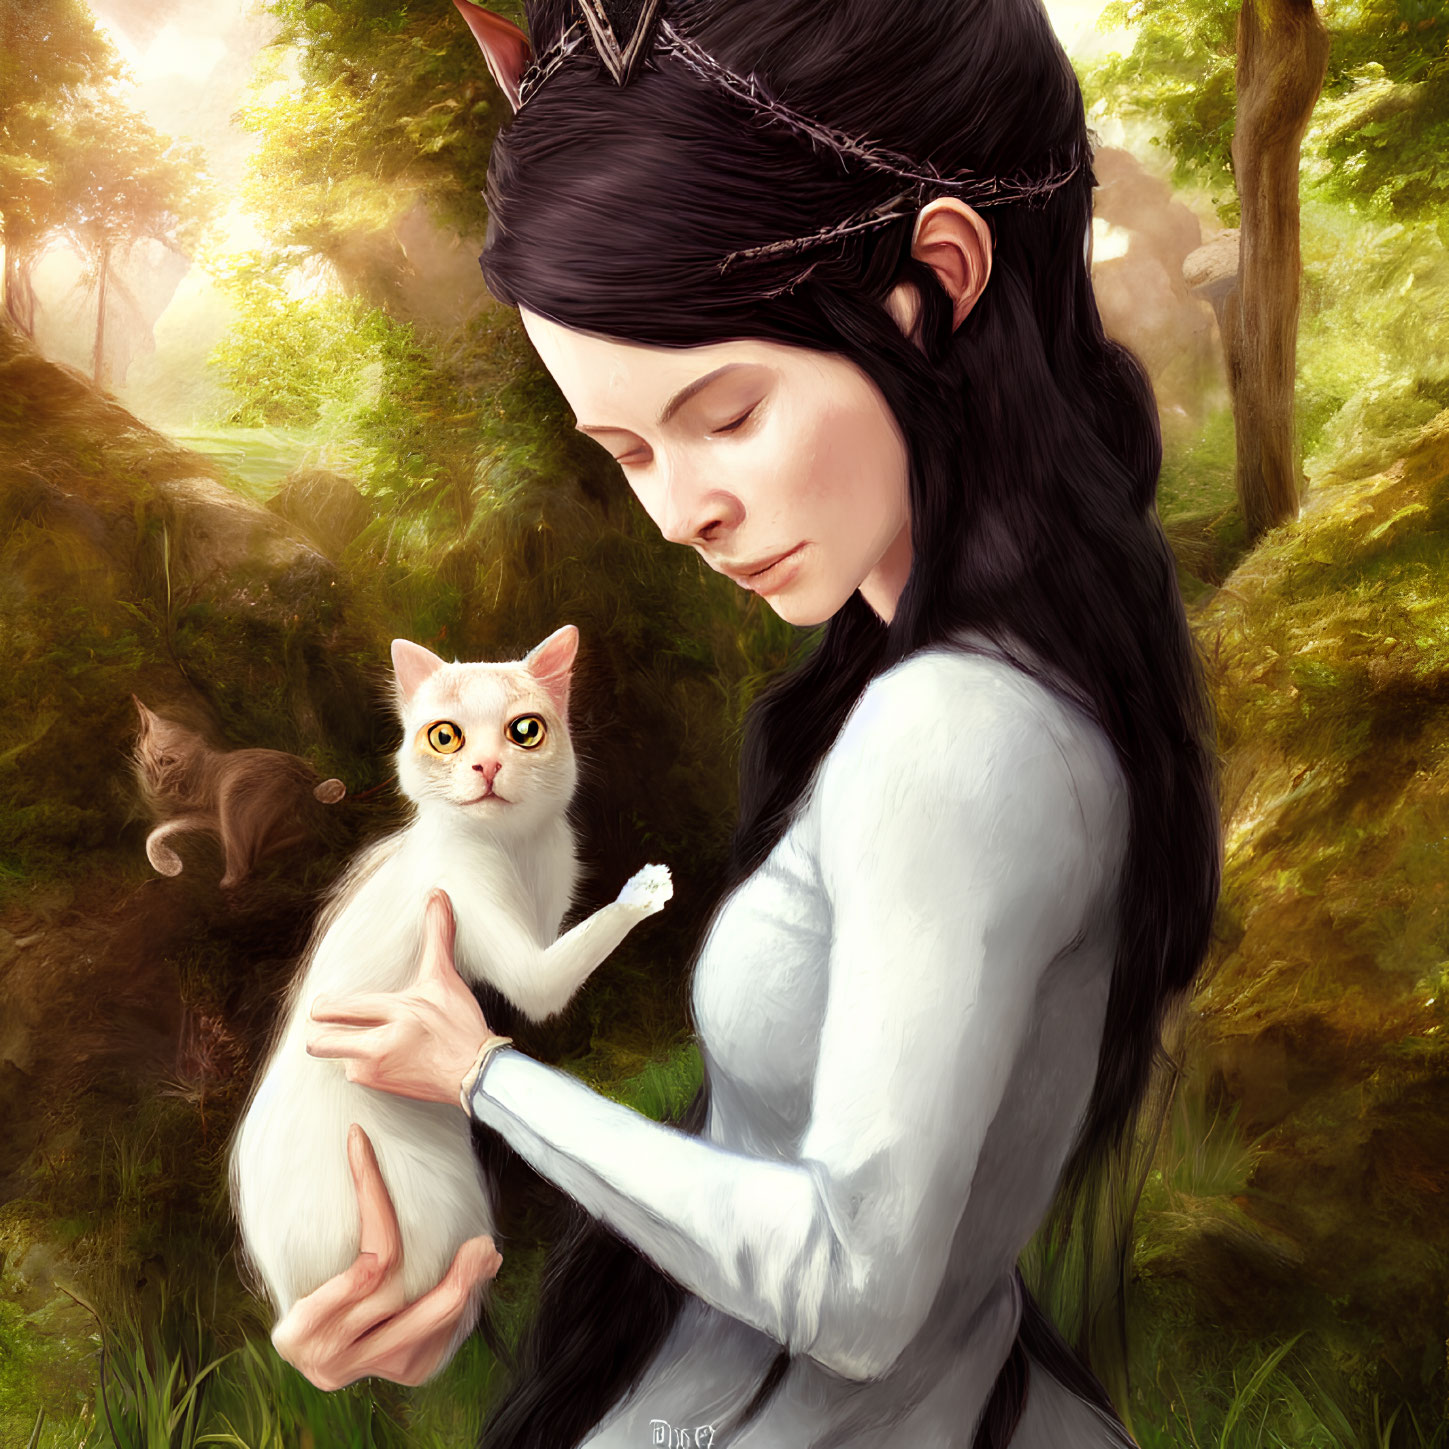 Serene woman with crown holding white cat in sunlit forest